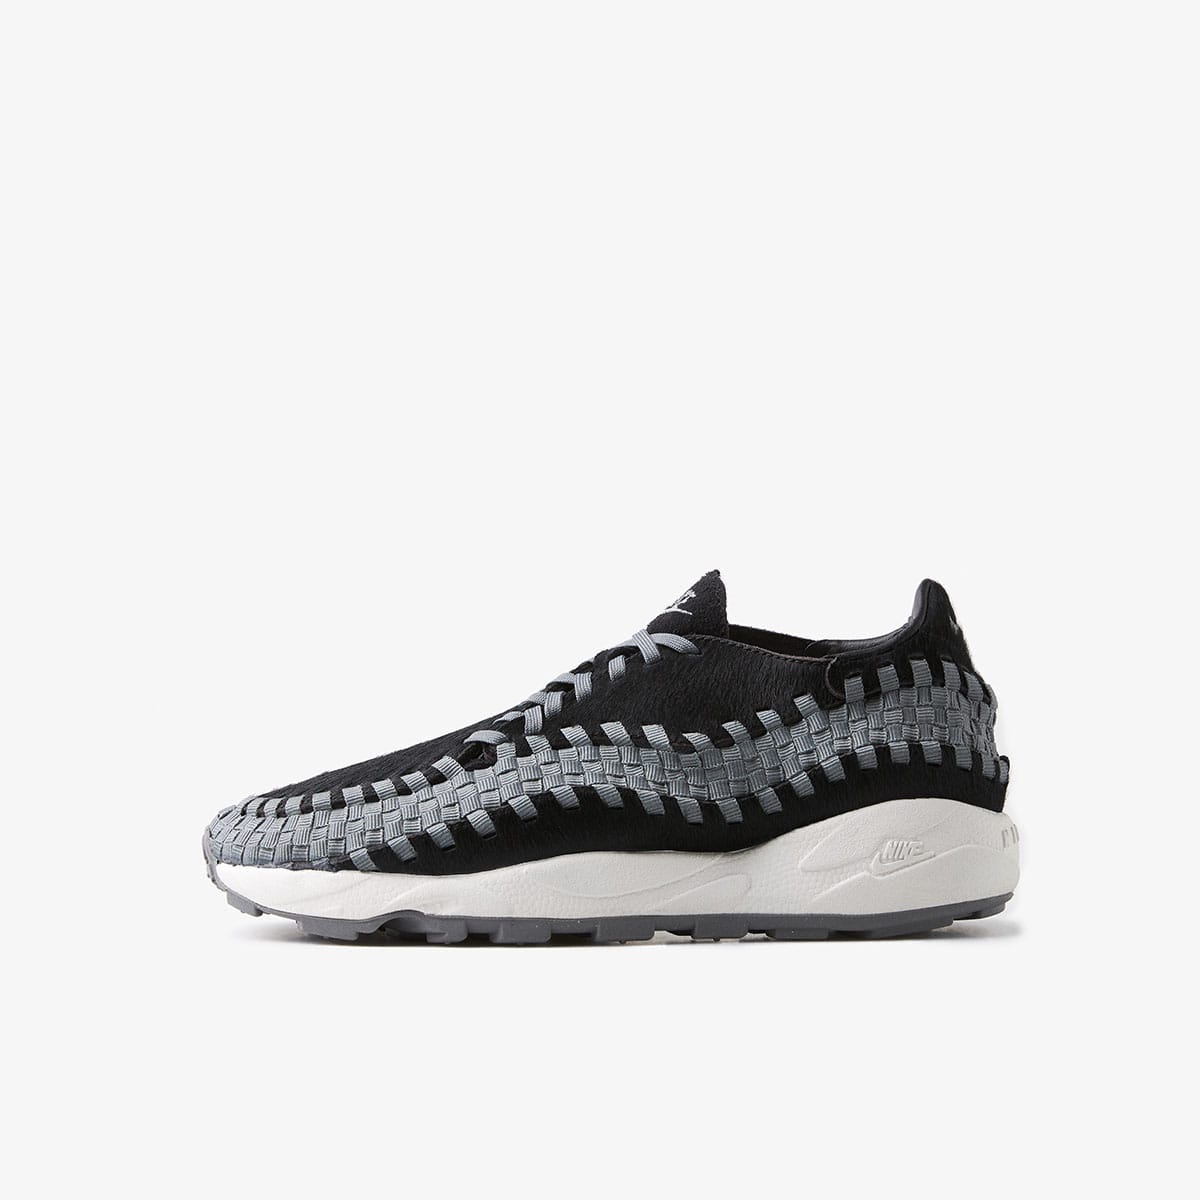 Nike Air Footscape Woven W (Black & Smoke Grey) | END. Launches